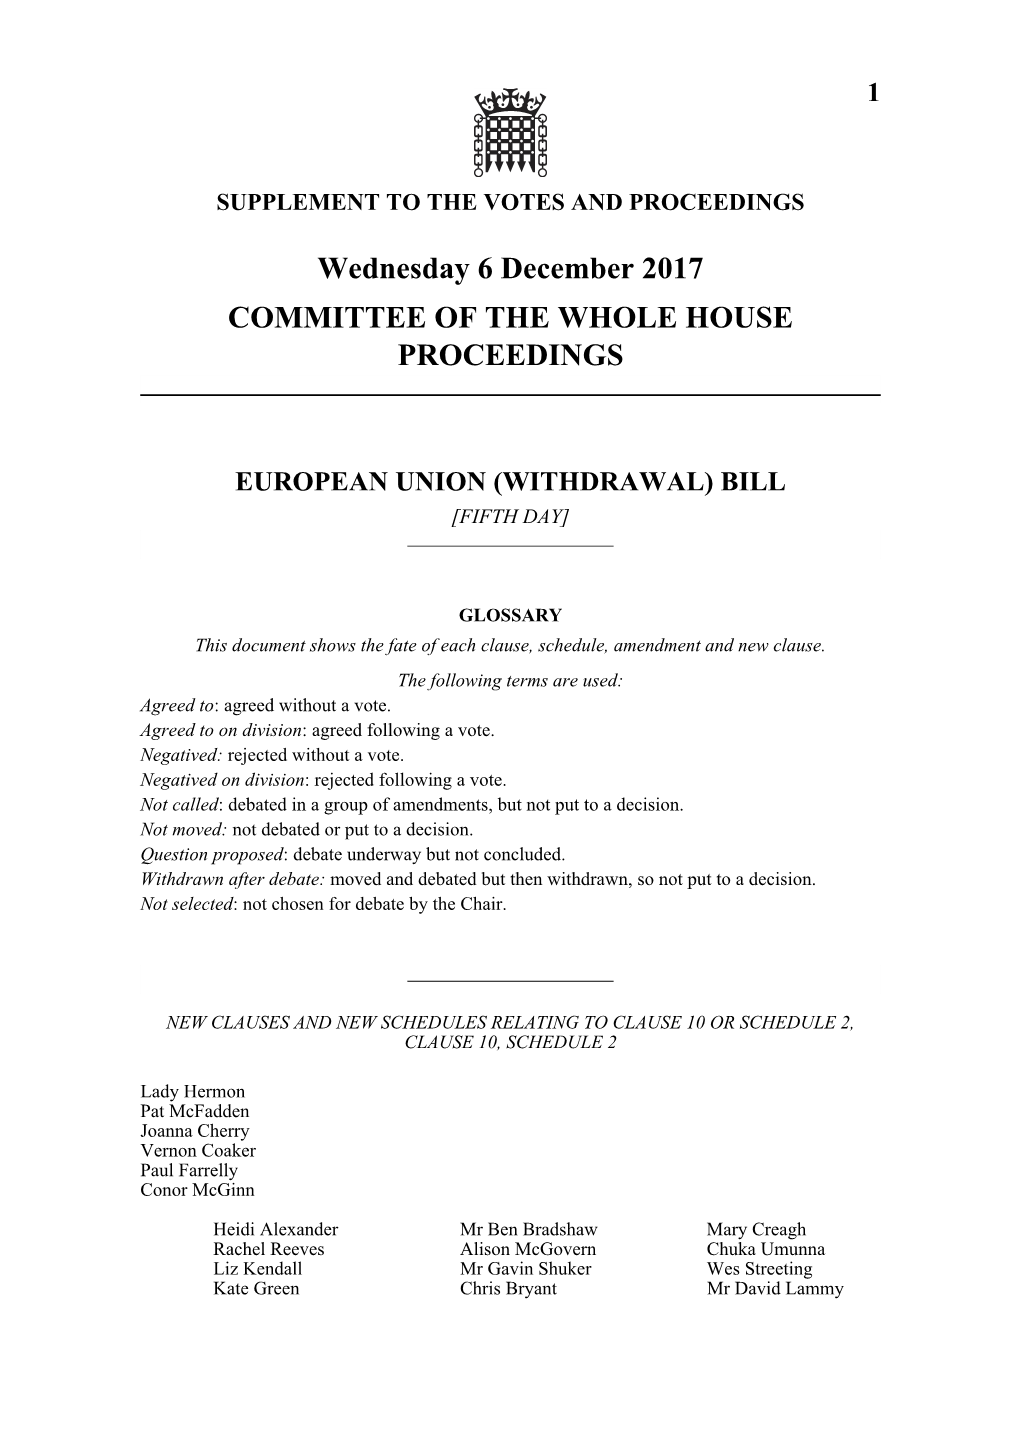 Wednesday 6 December 2017 COMMITTEE of the WHOLE HOUSE PROCEEDINGS